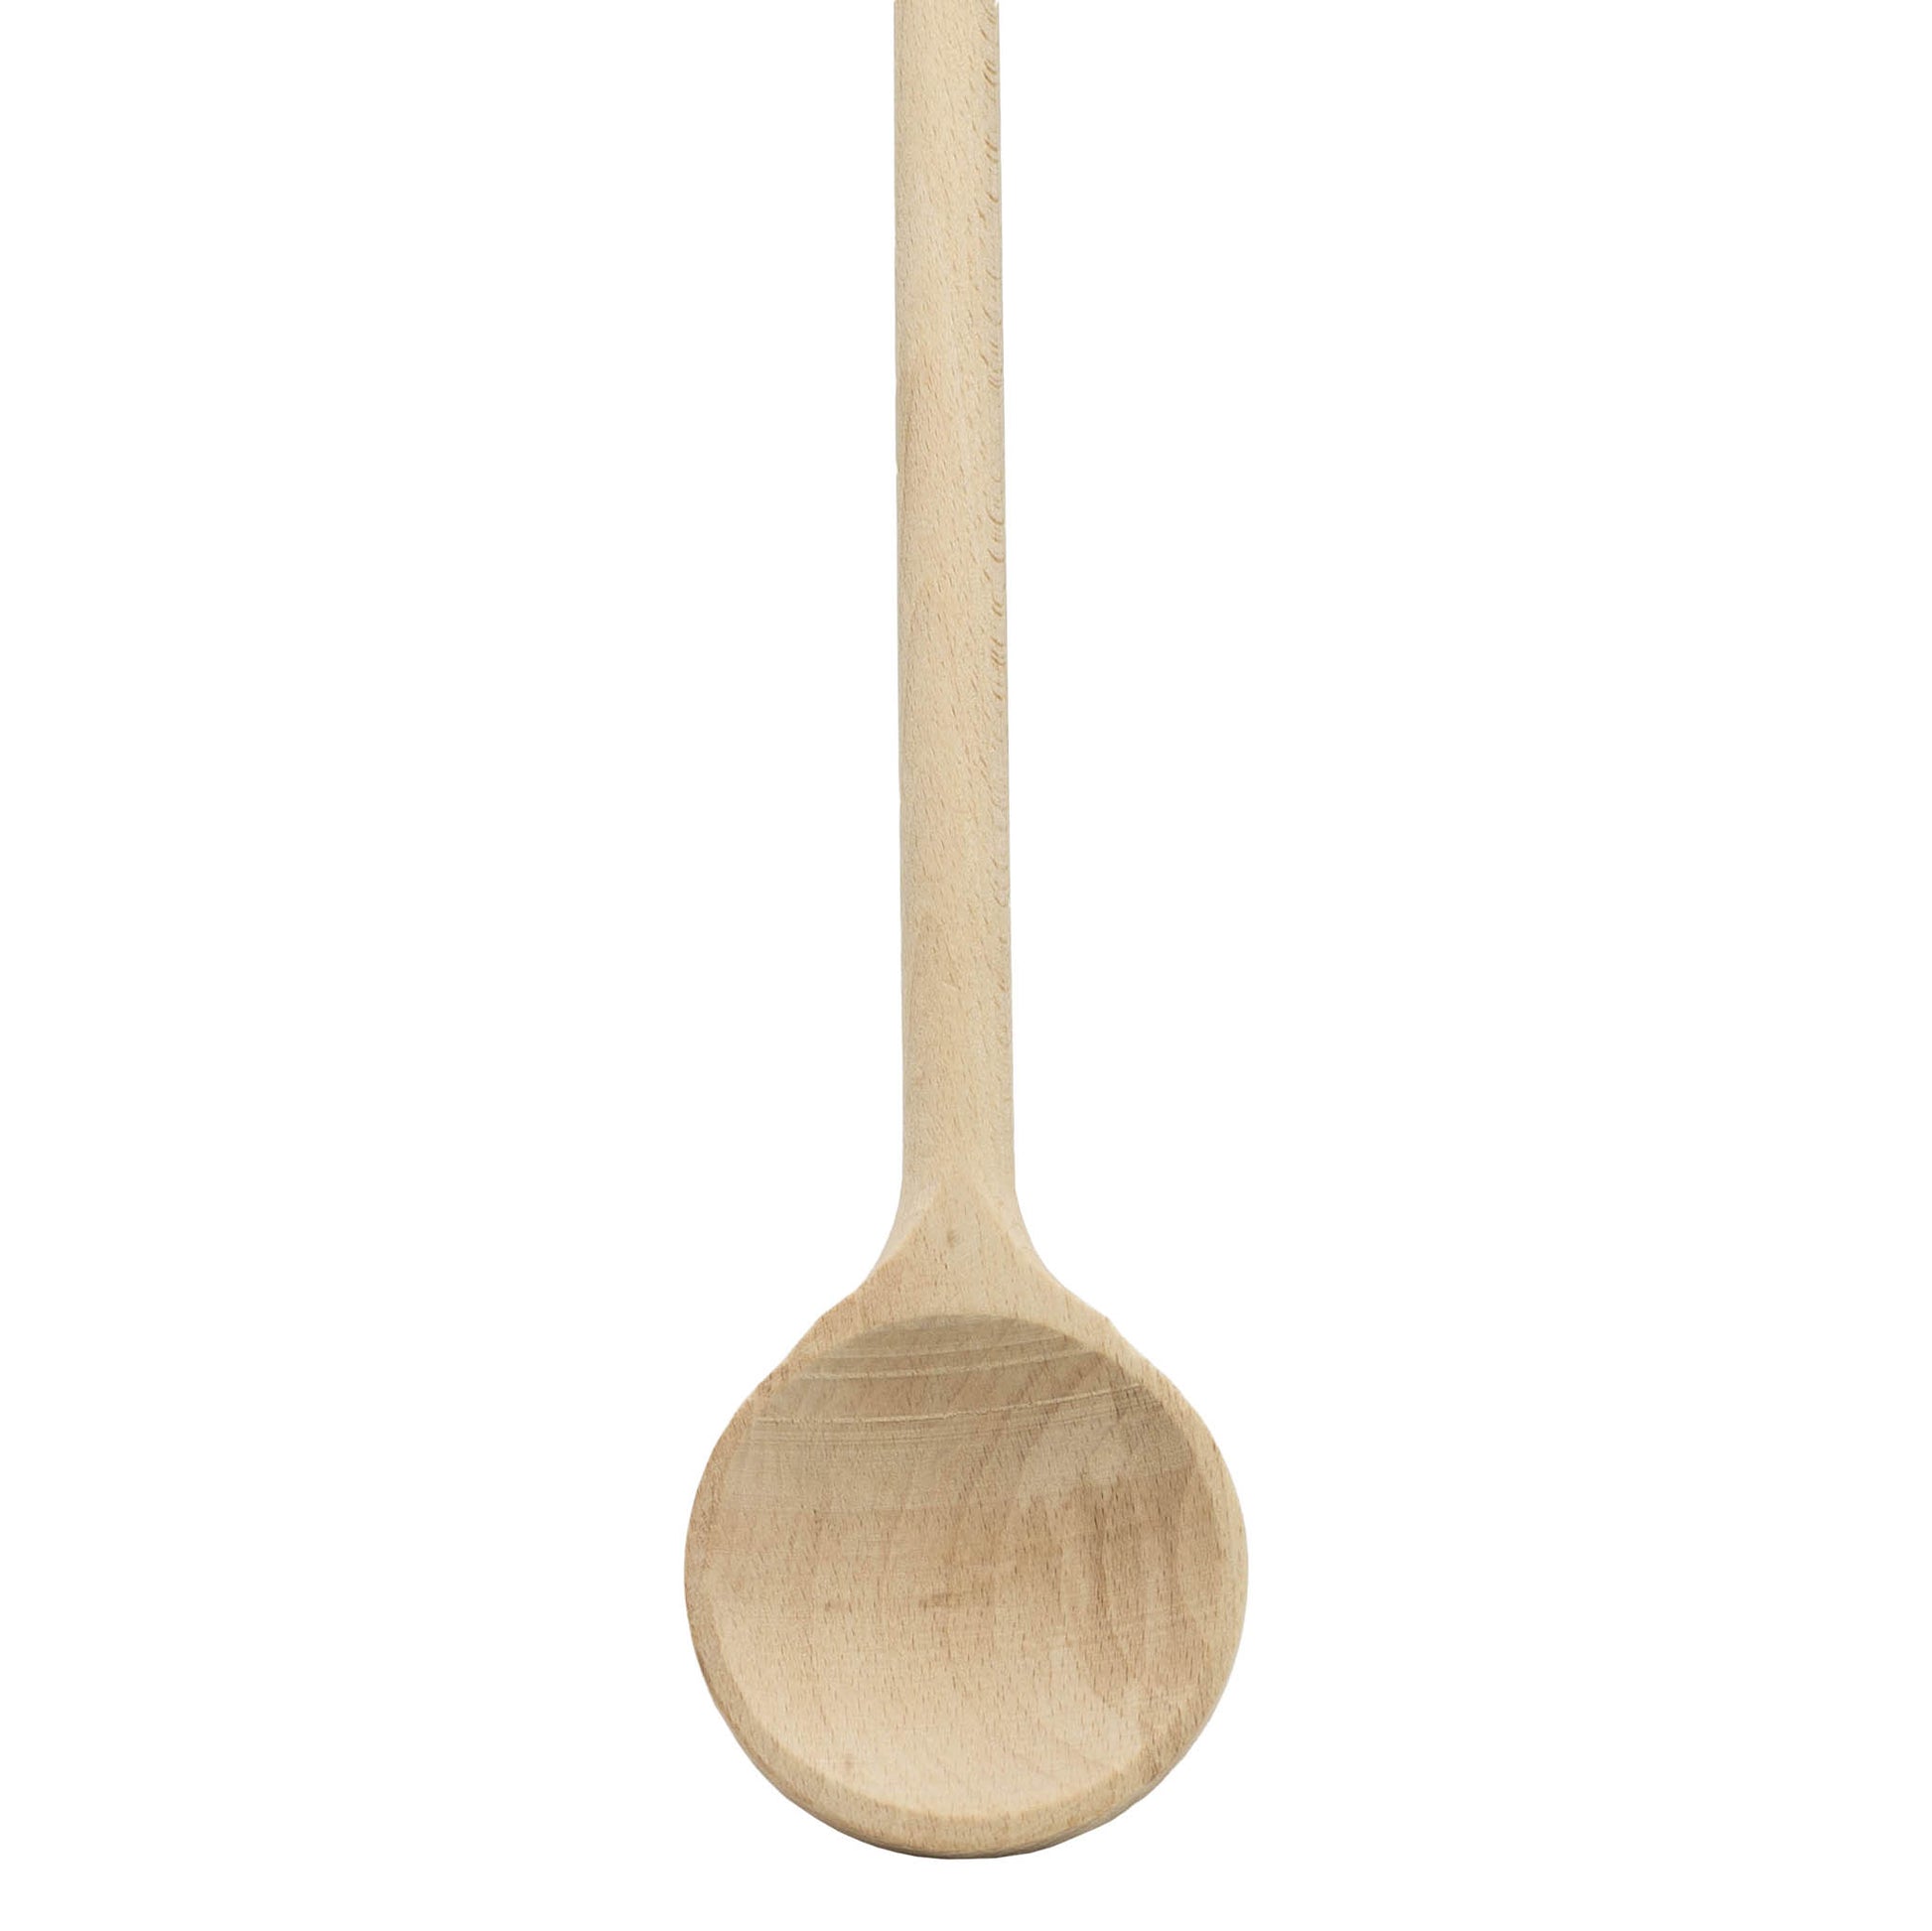 italian made wooden spoon with 80cm handle for stirring puree tomatoes for passata making. 